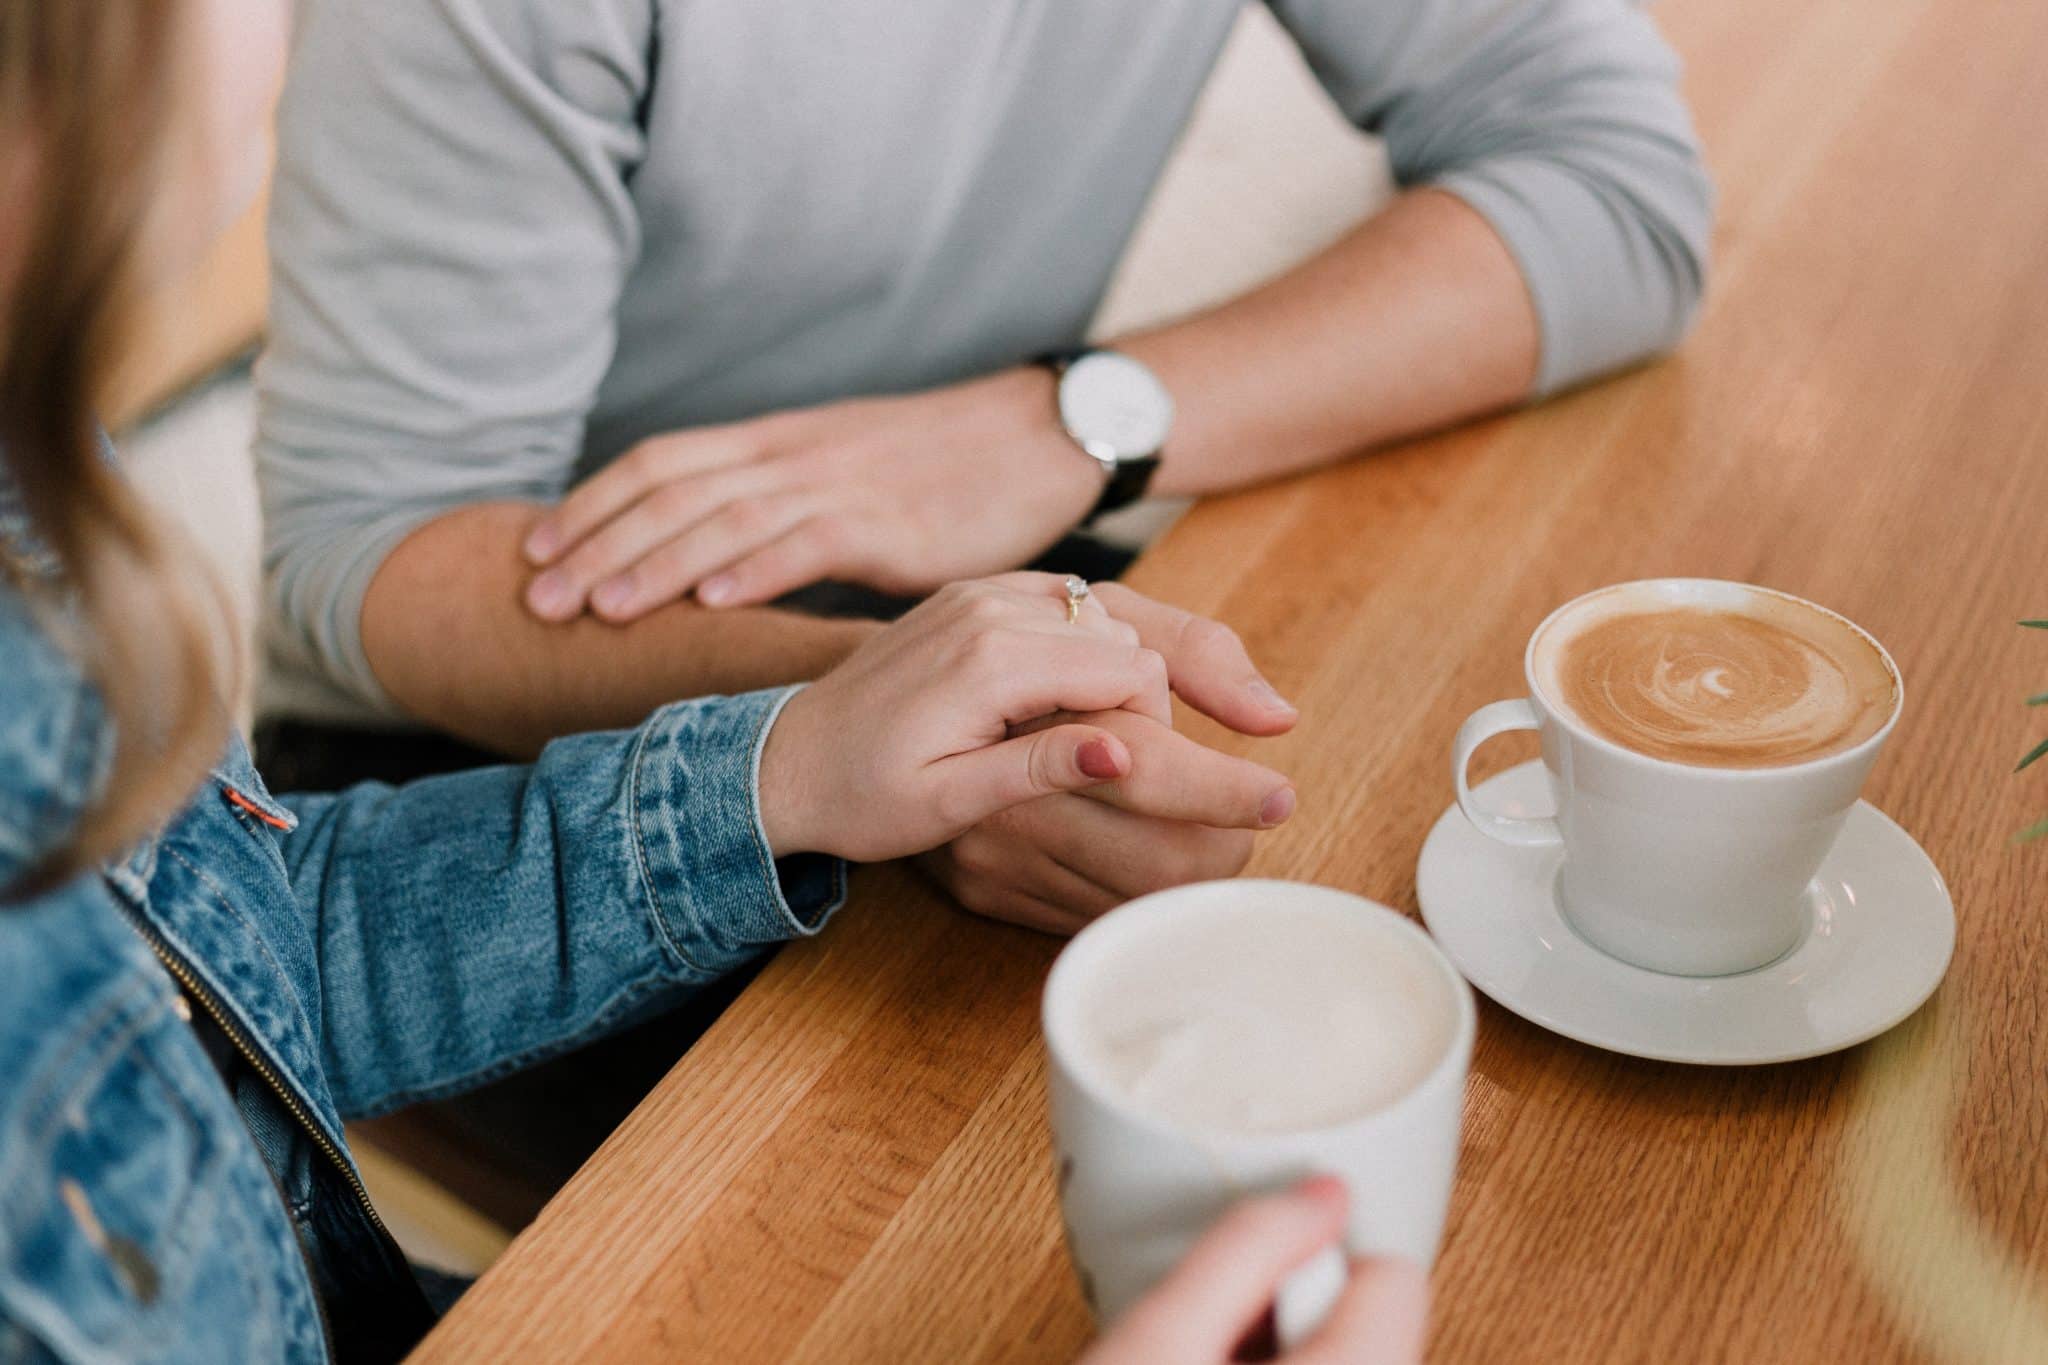 Couple holds hands at premarital counseling session while sipping coffee